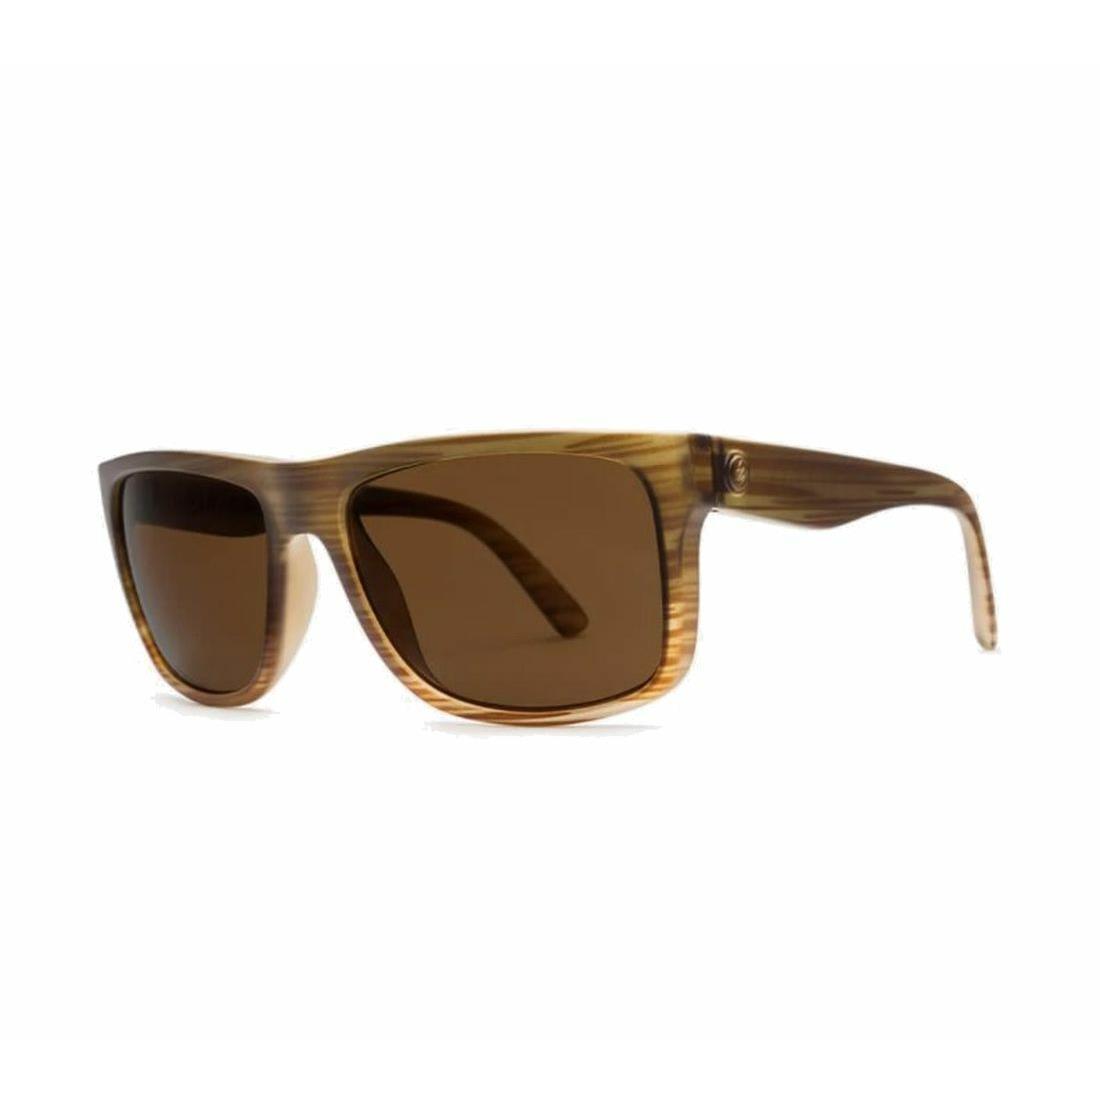 Electric Swingarm XL Sunglasses Red Wood with Bronze Polarized Lens - Frame: , Lens: